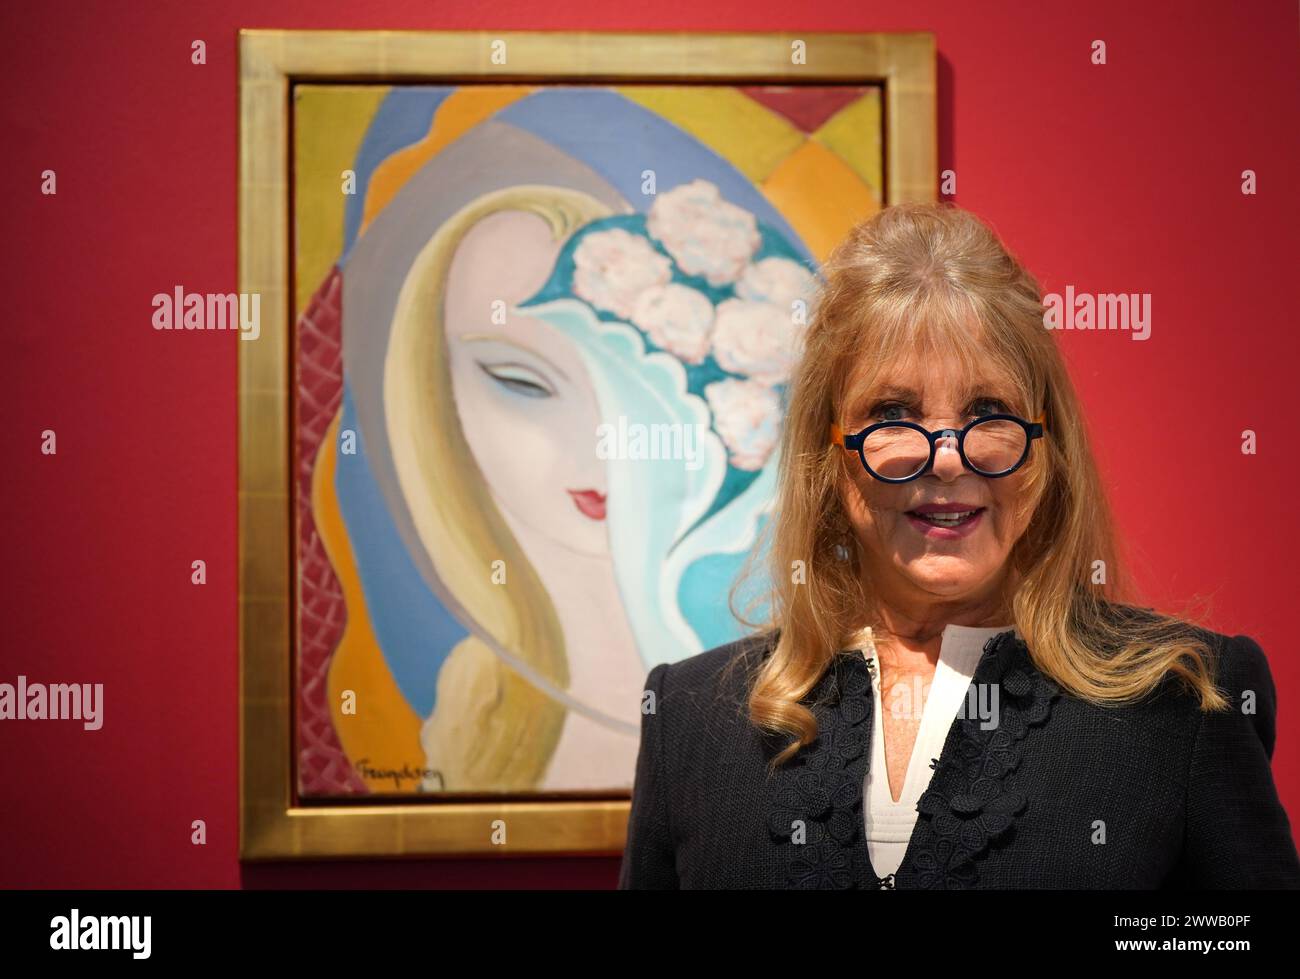 File photo dated 14/3/2024 of Pattie Boyd with La Jeune Fille au Bouquet, by Emile Theodore Frandsen de Schomberg, circa 1950-55, the original painting used as the cover artwork for the 1970 Derek and the Dominos album Layla and Other Assorted Love Songs. A trove of treasures from the former fashion model, including photographs and love letters, have sold for almost £3 million at auction - far exceeding its original estimate. The Pattie Boyd Collection included letters from the time she was involved in a love triangle with former husbands Eric Clapton and George Harrison. Issue date: Saturday  Stock Photo